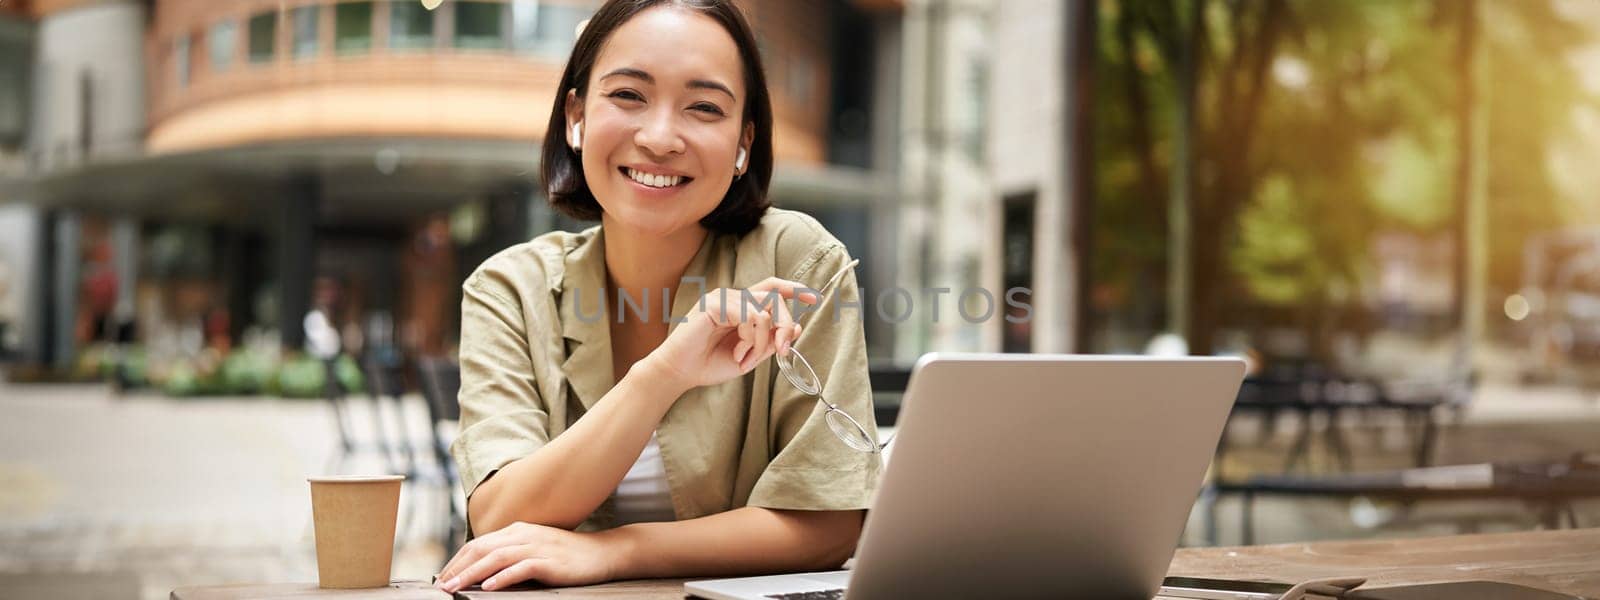 Urban people. Young woman working with laptop from cafe, coworking space, sitting outdoors with cup of coffee and smiling at camera, holding glasses.